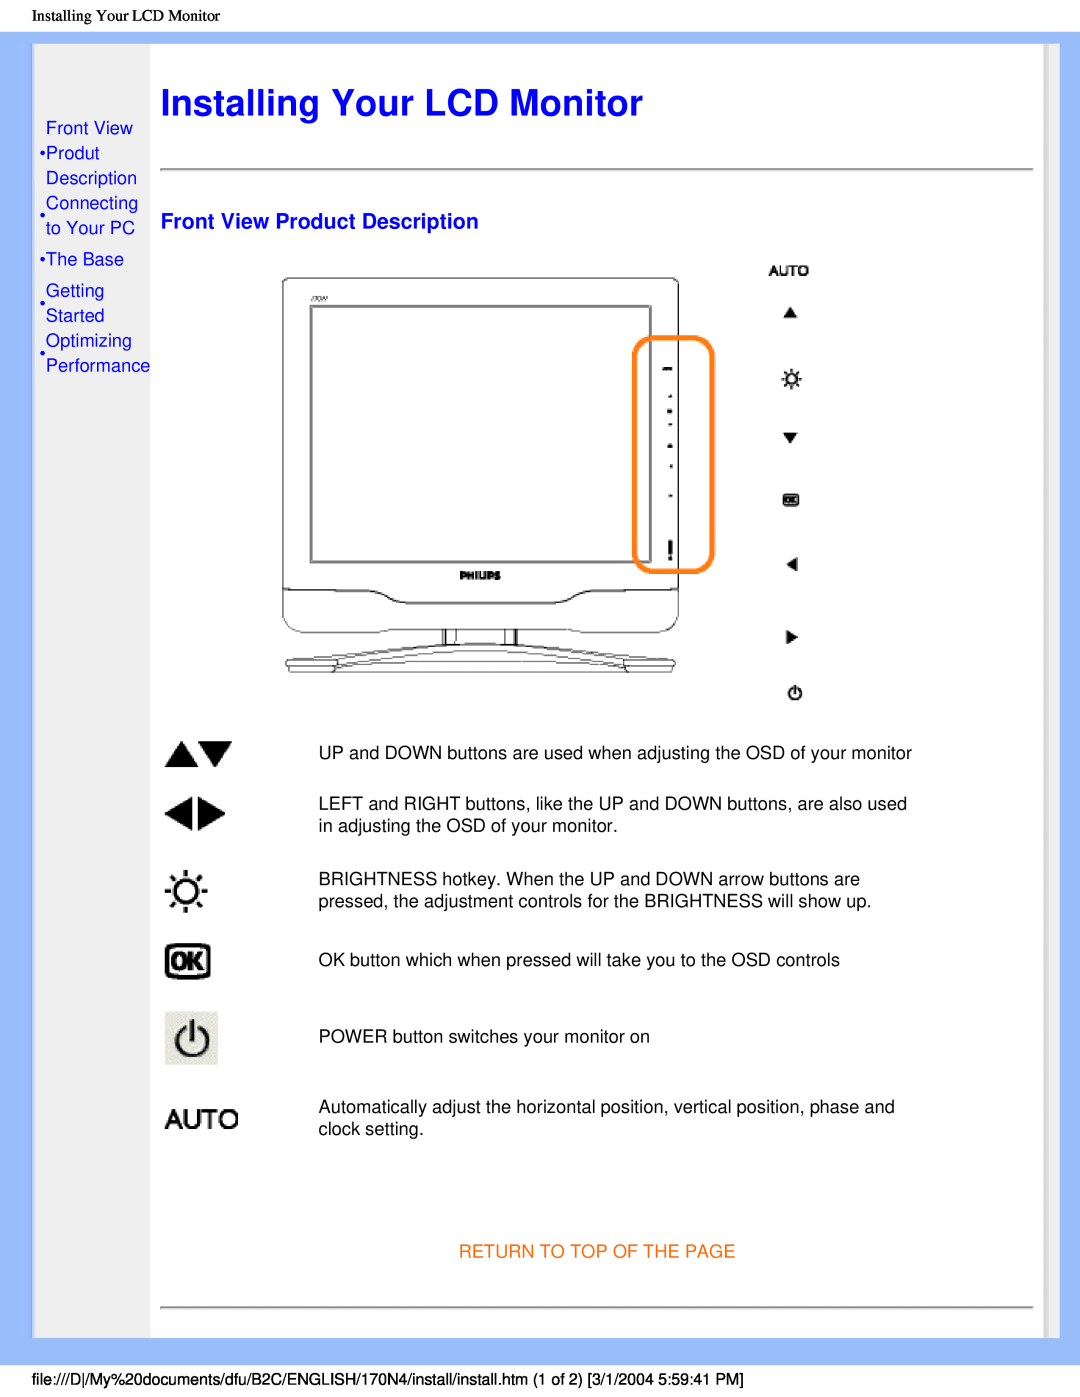 Philips 170N4 Installing Your LCD Monitor, Front View Product Description, Front View Produt Description, The Base 